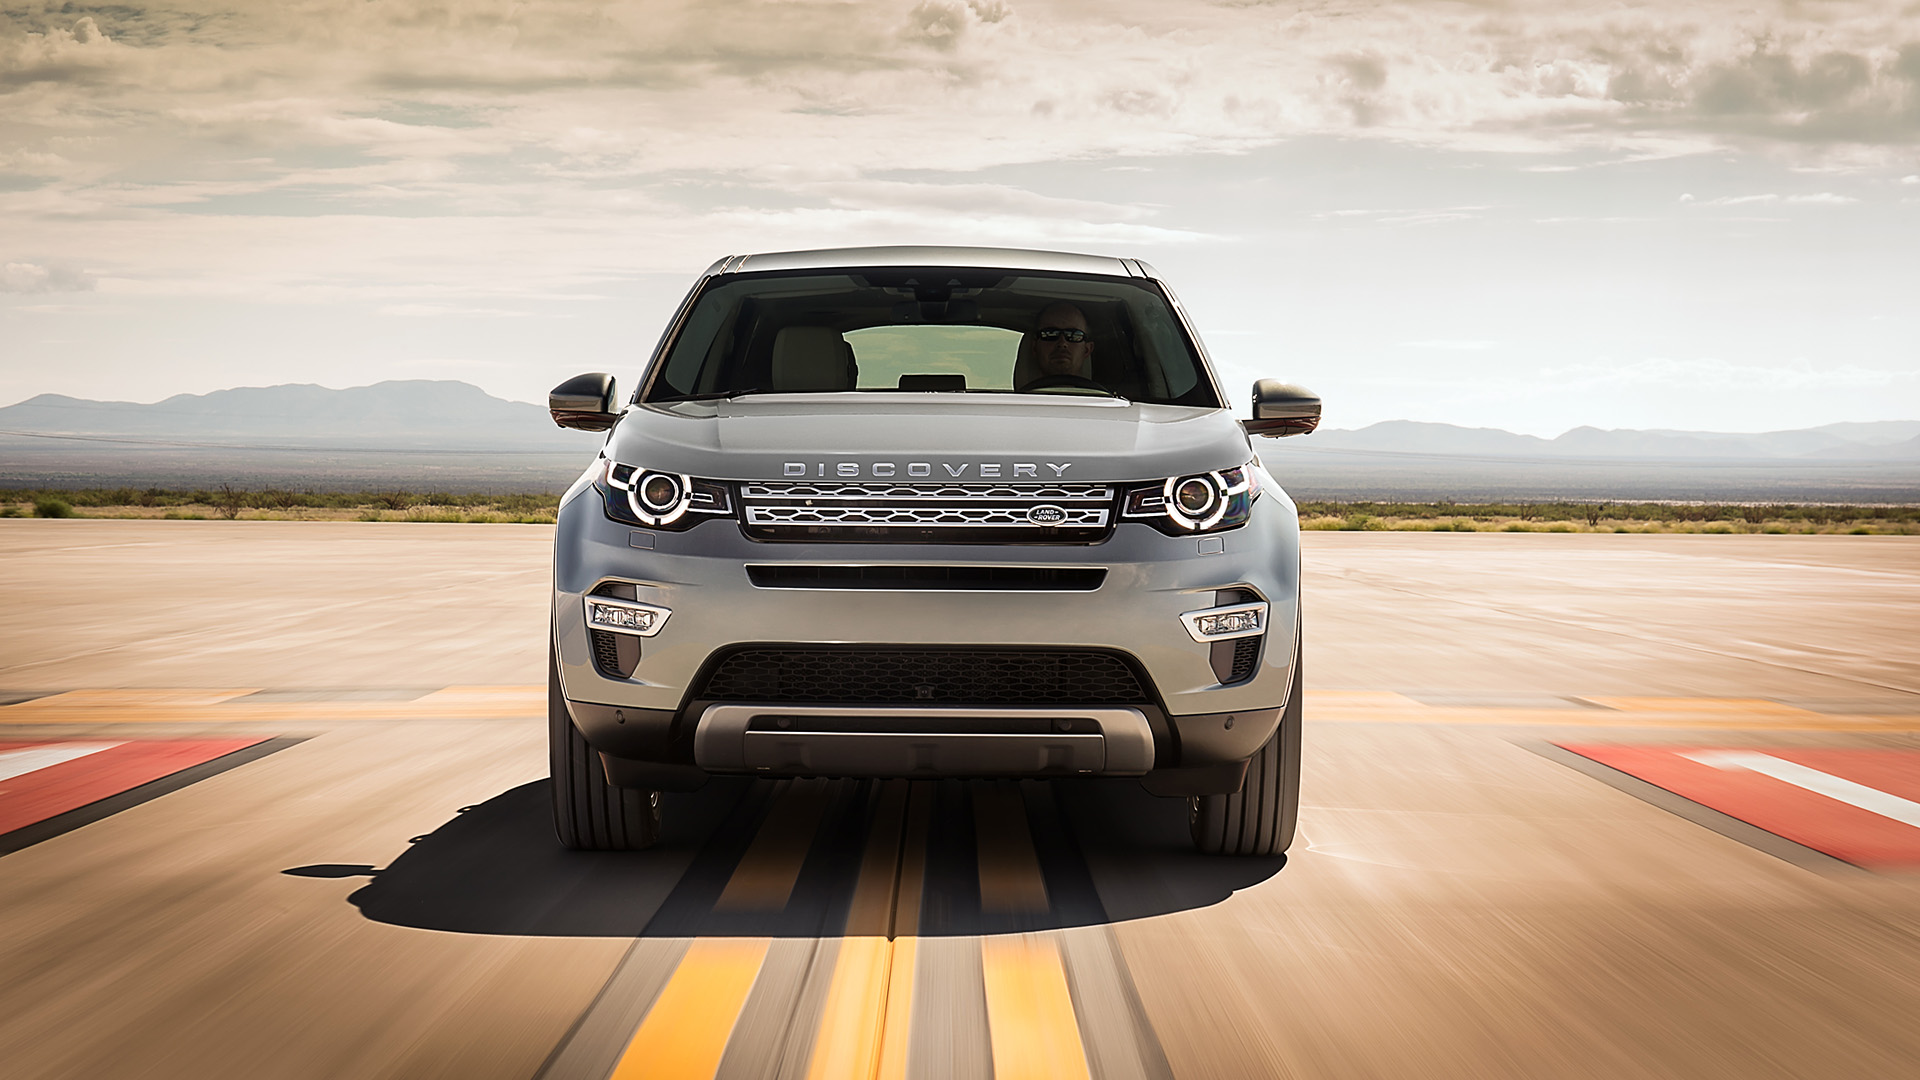  2015 Land Rover Discovery Sport Wallpaper.